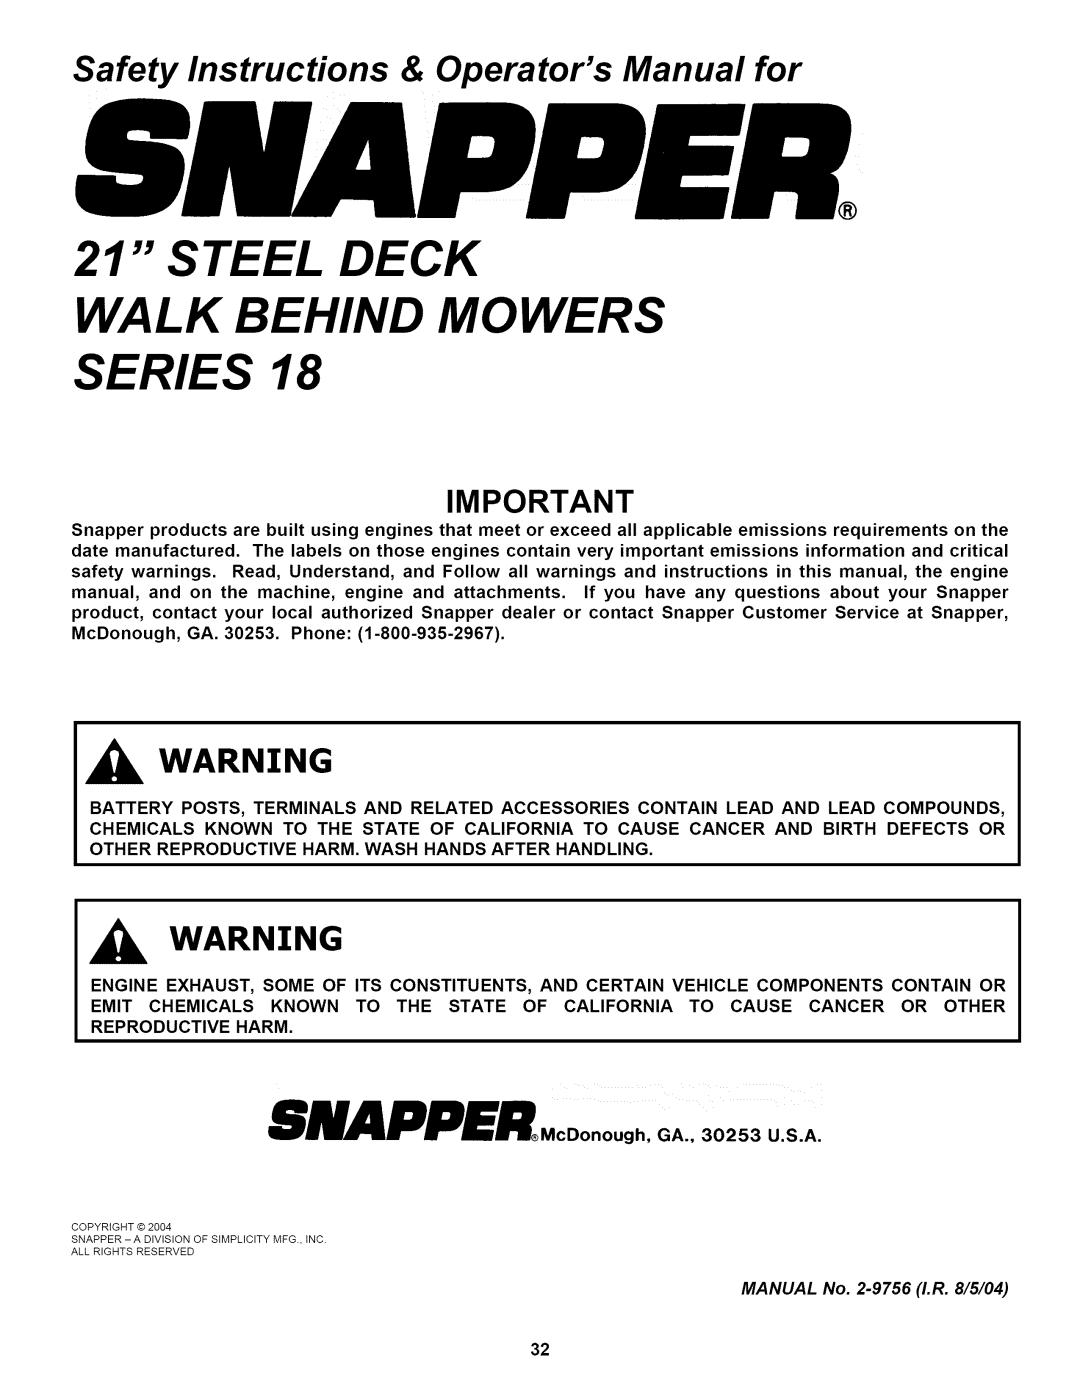 Snapper P216518B Steel Deck Walk Behind Mowers Series, Safety Instructions & Operators Manual for 